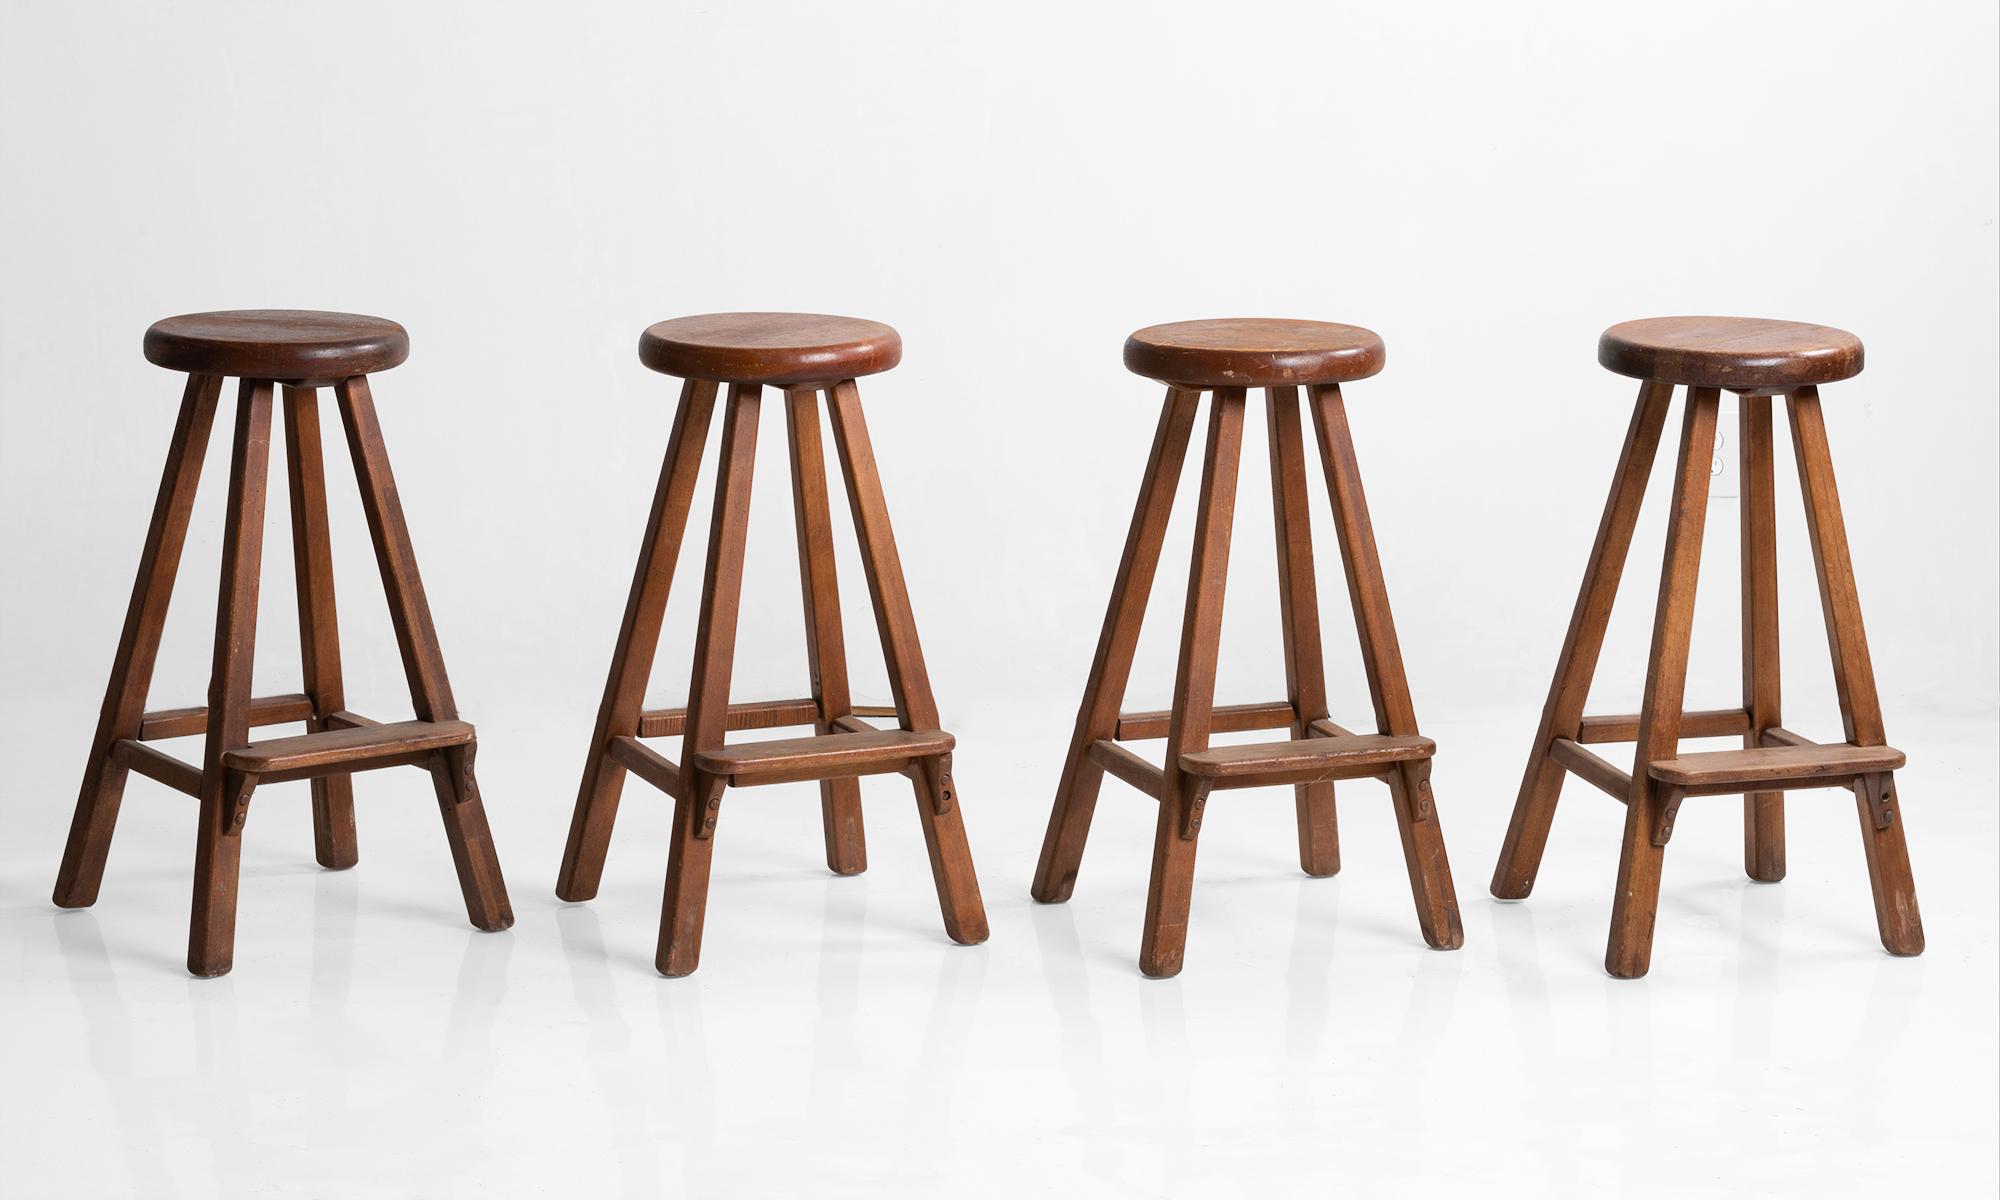 Old hickory maple stools, North America, 20th century.

Four legged stool with round seat and footrest. 

Made in Martinsville, Indiana.